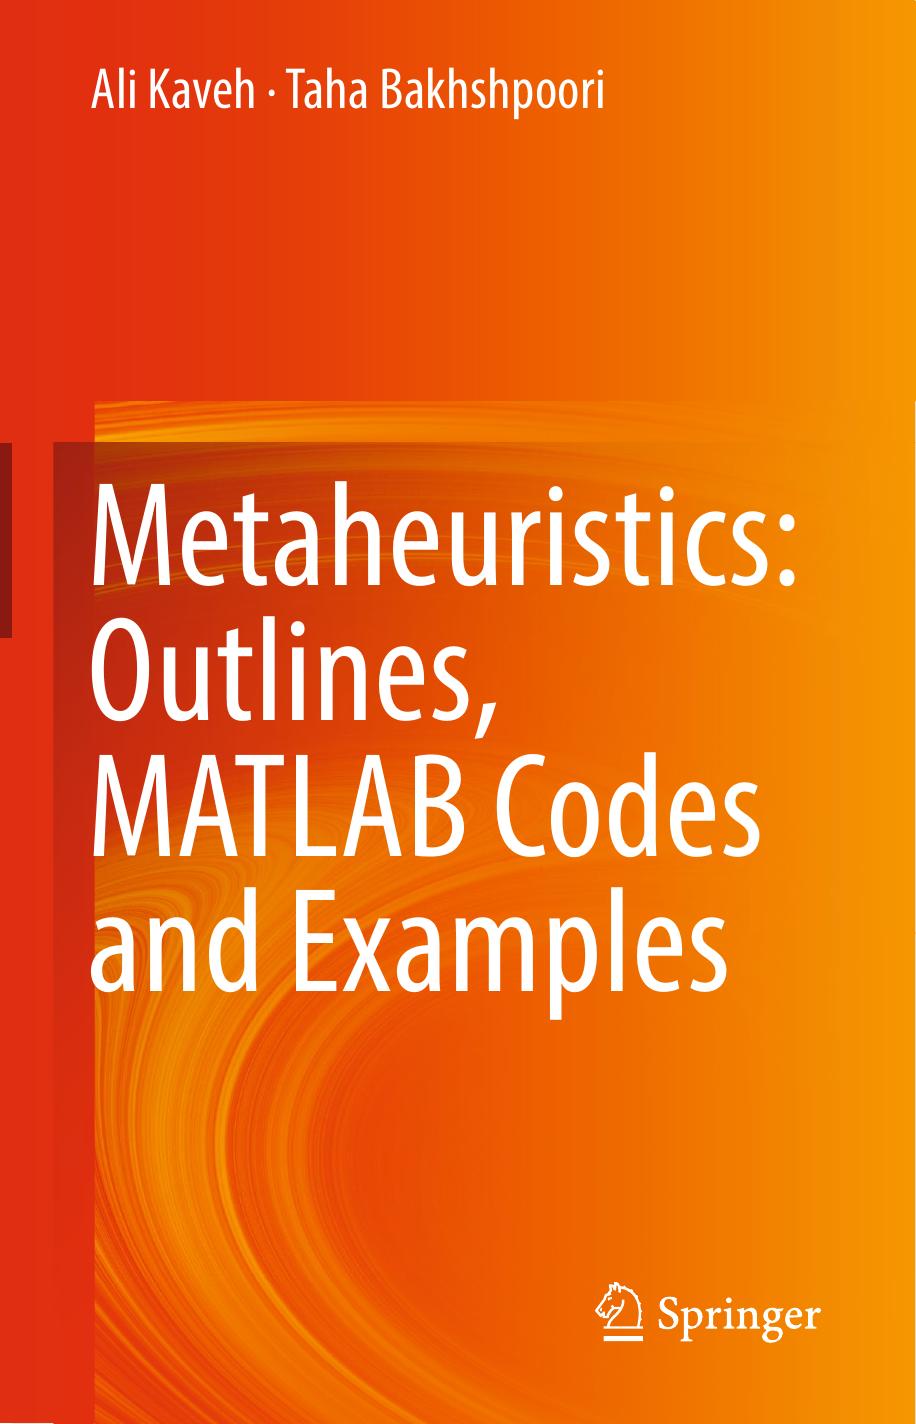 Springer.Metaheuristics.Outlines.MATLAB.Codes.and.Examples.3030040666.jpg